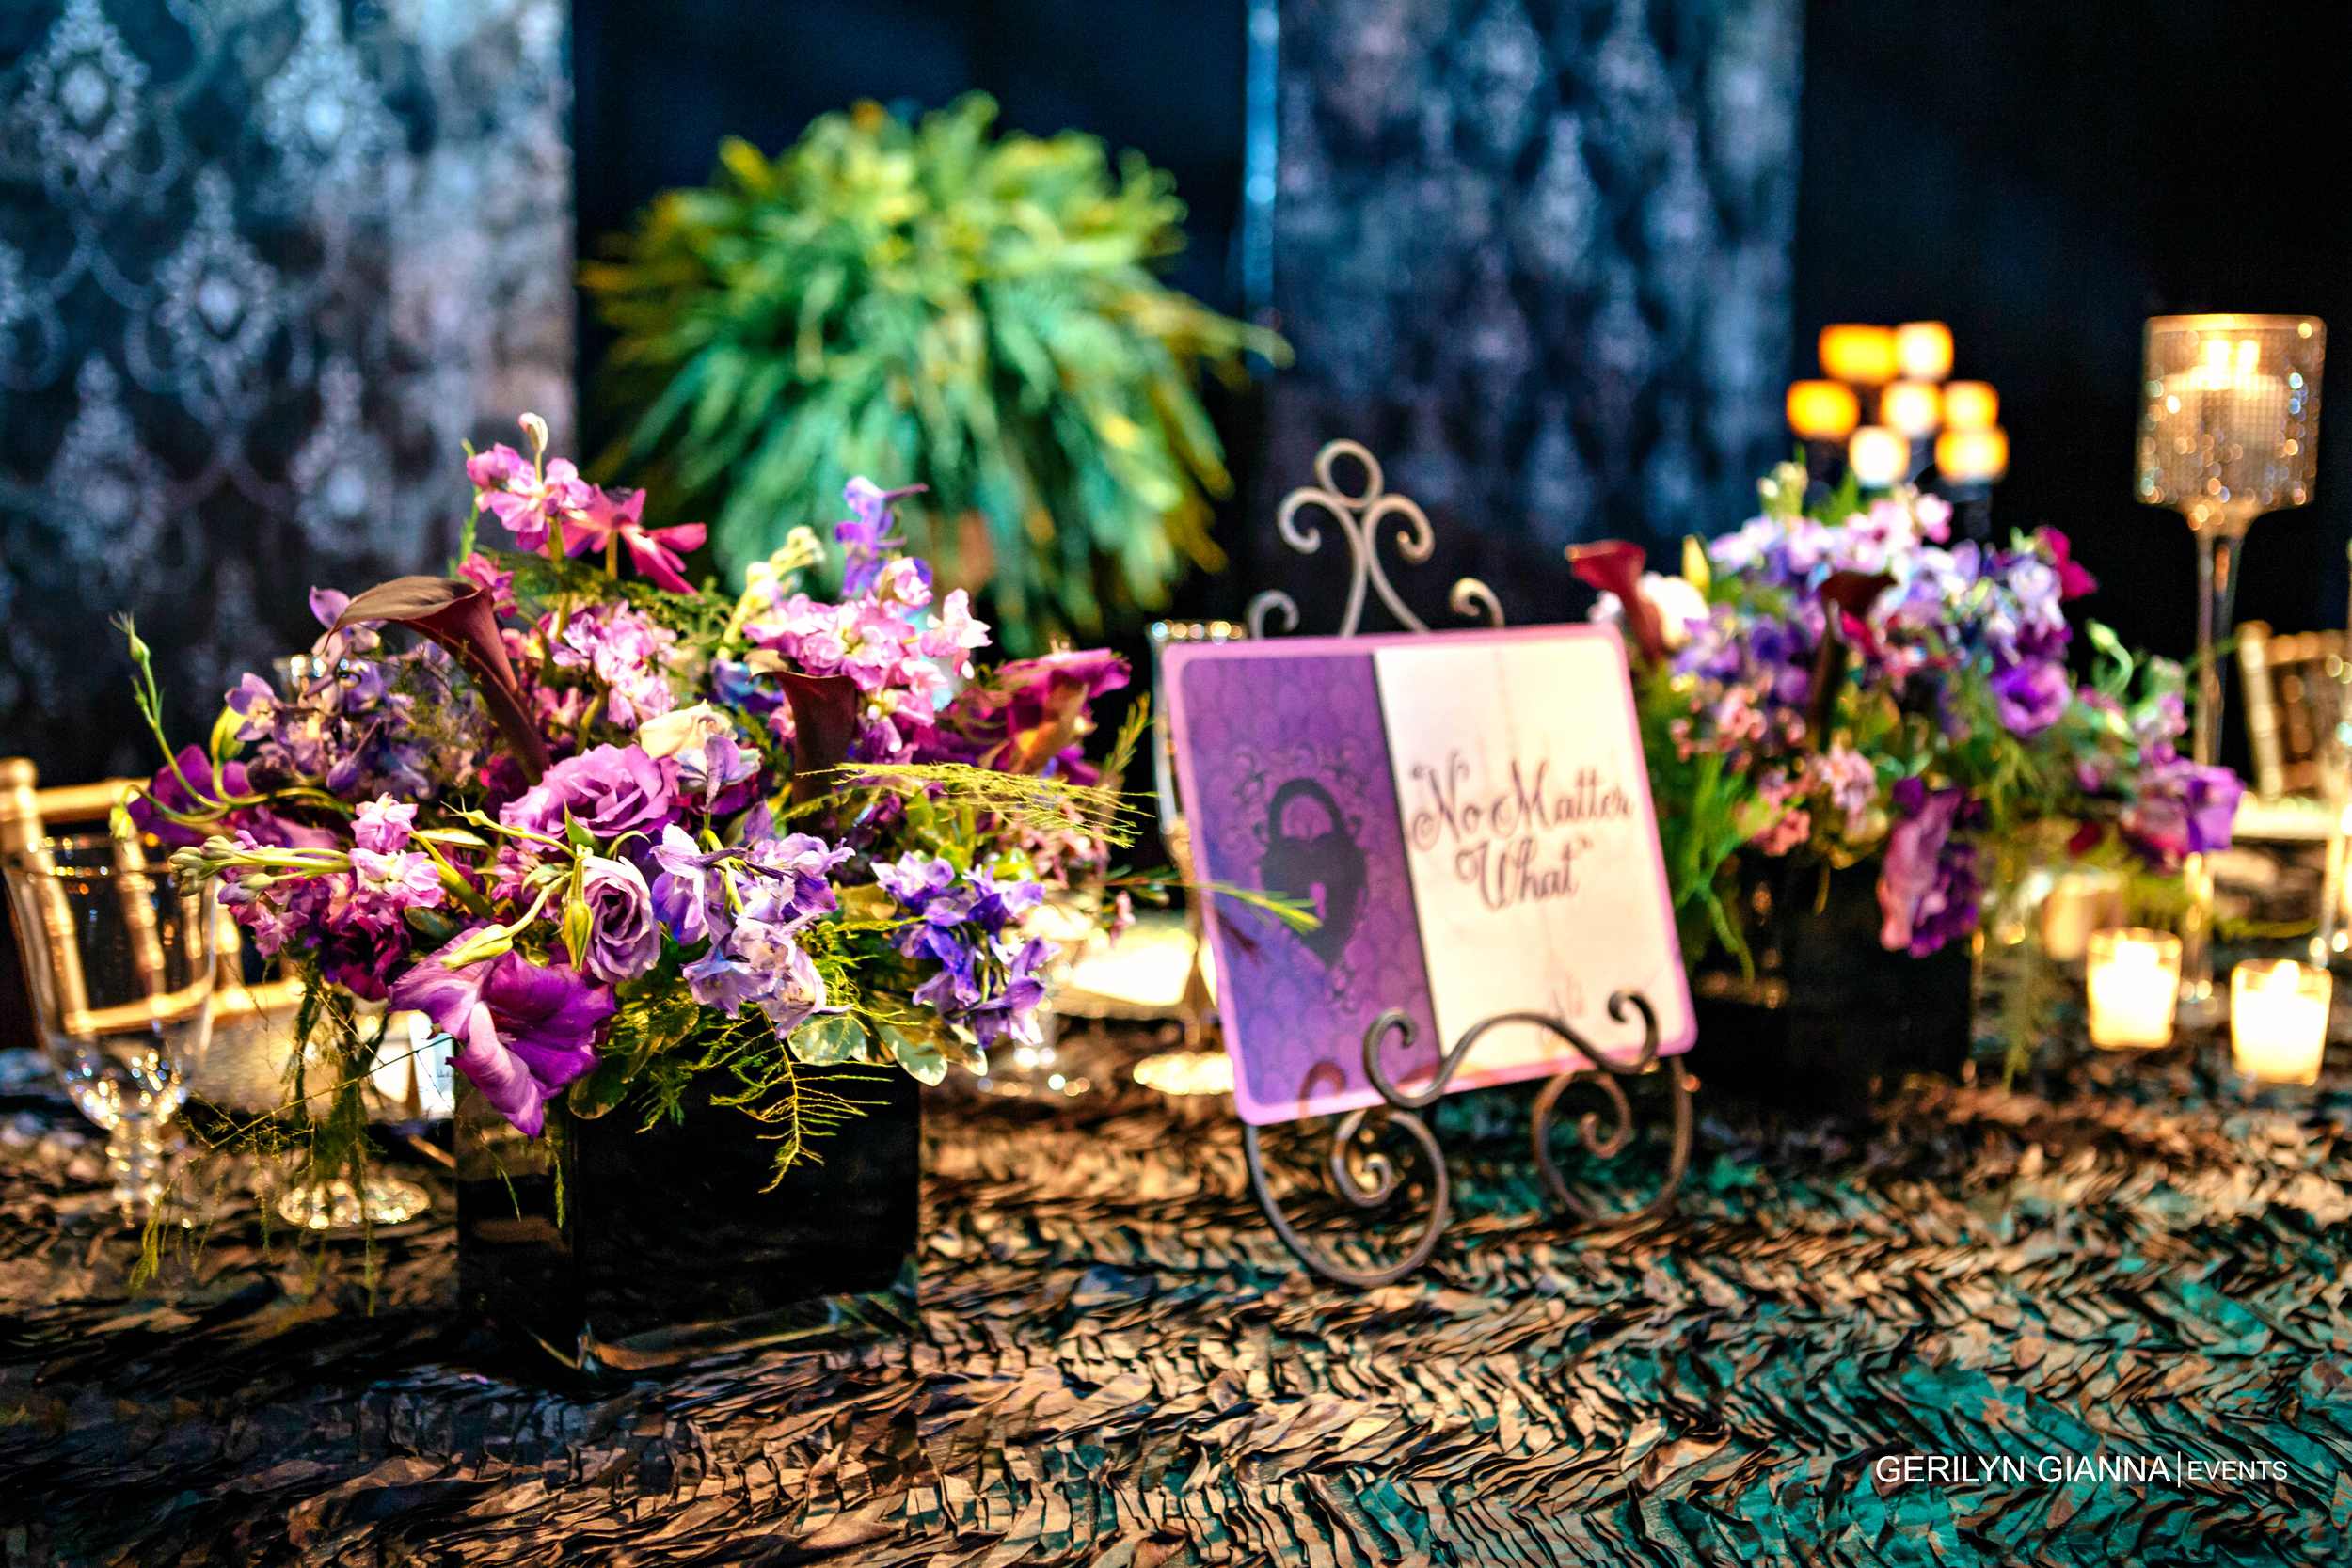 Gerilyn Gianna Event and Floral Design | Wedding at The Borland Center for Performing Arts | Medieval Wedding Theme | Robert Madrid Photography